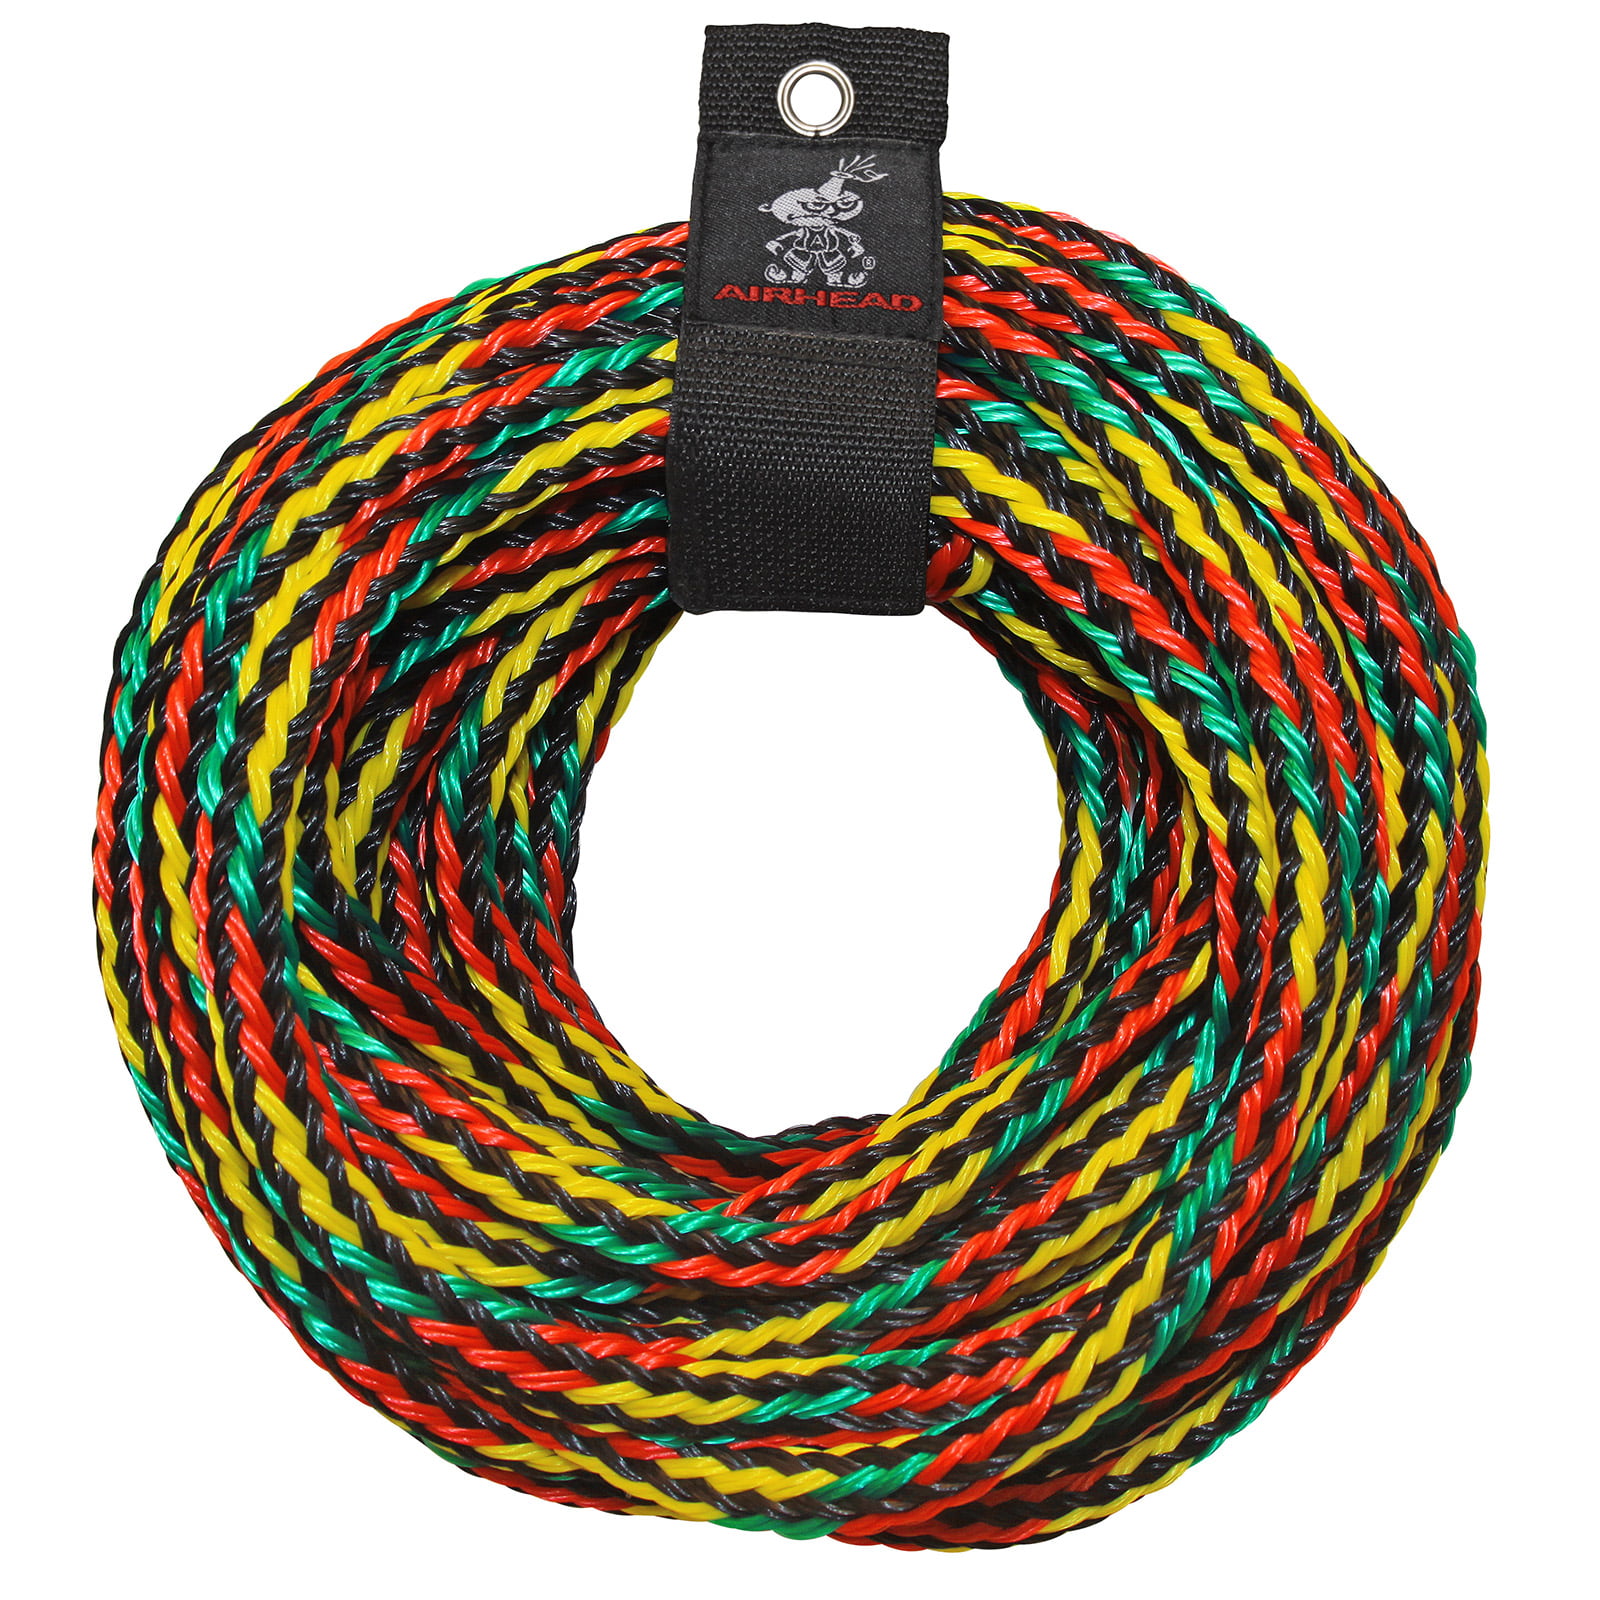 Sportstuff 4 Person Towable Rope for sale online Red 57-1532 